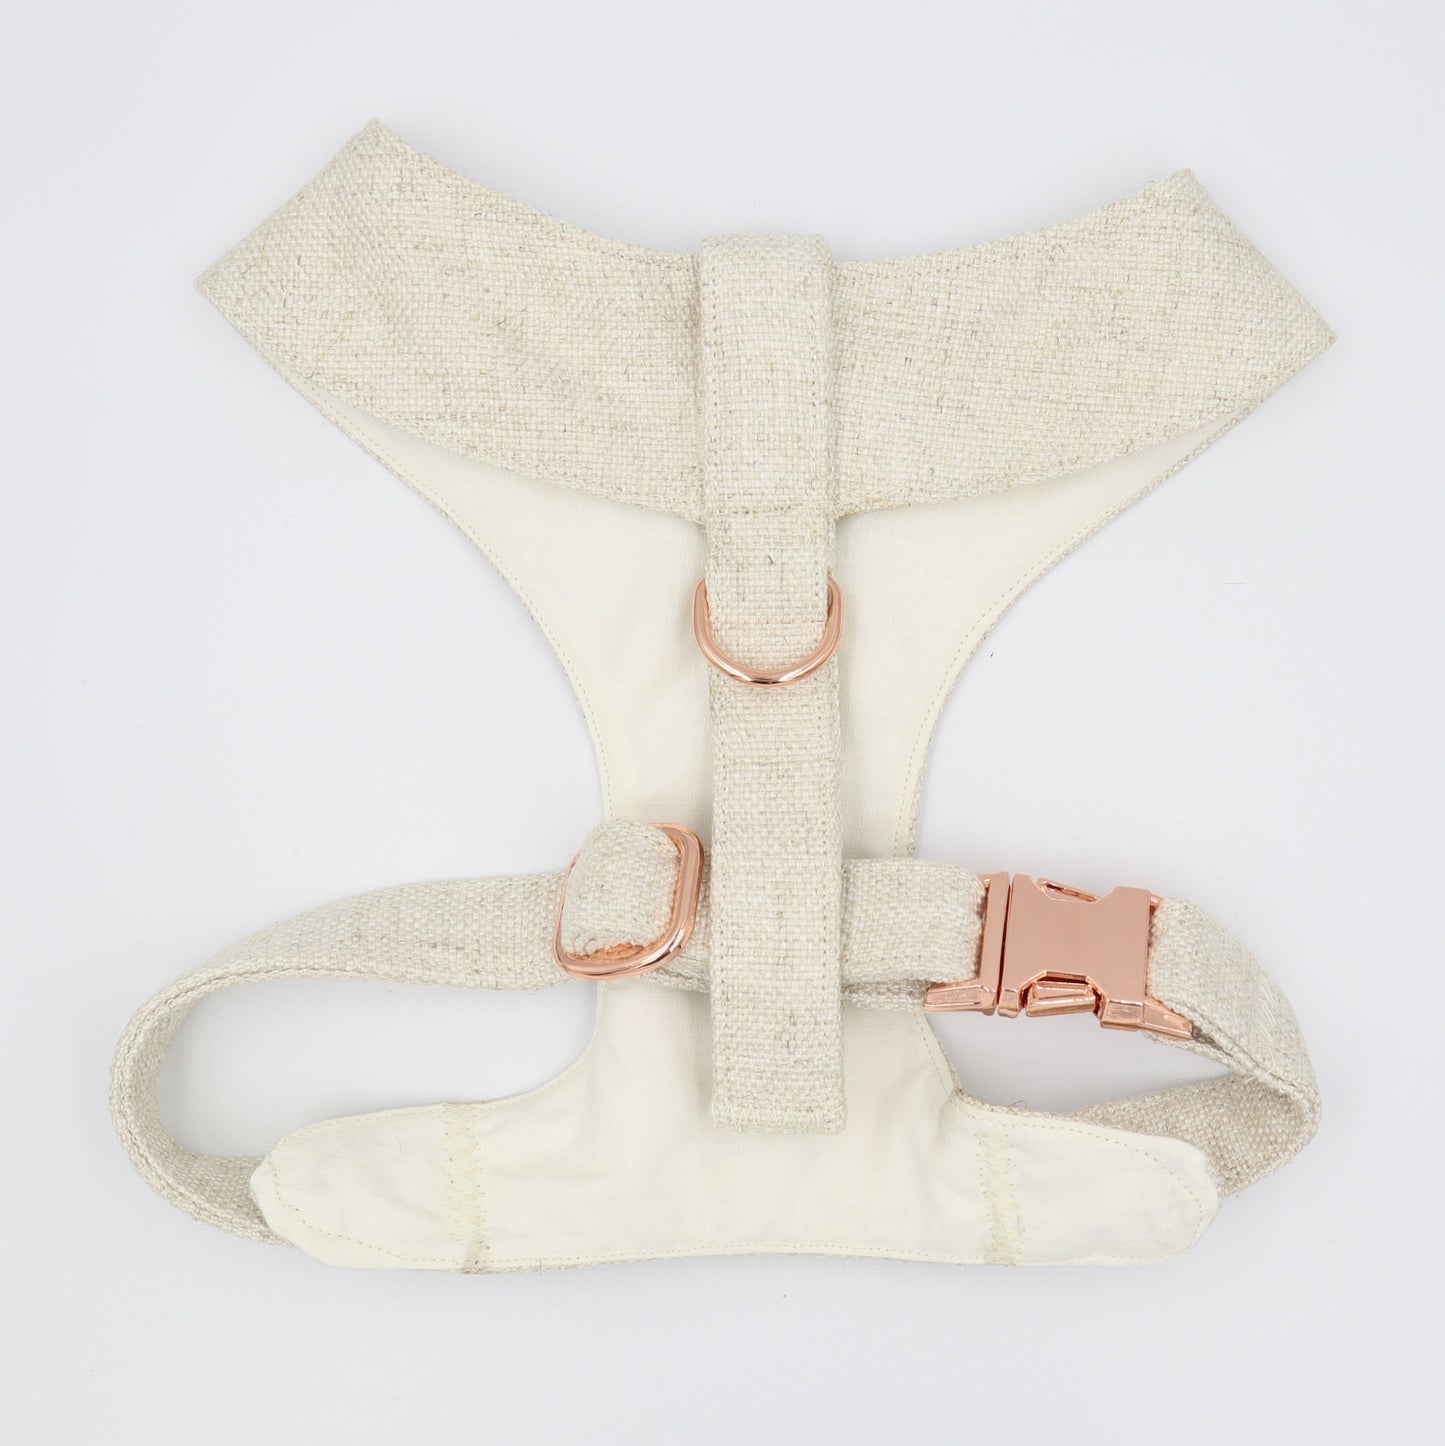 Tuxedo Wedding Dog Harness in Beige & Sage Natural Linen Style TEXTURED Fabric with Rose Gold Satin Bow CHOICE of COLOURS